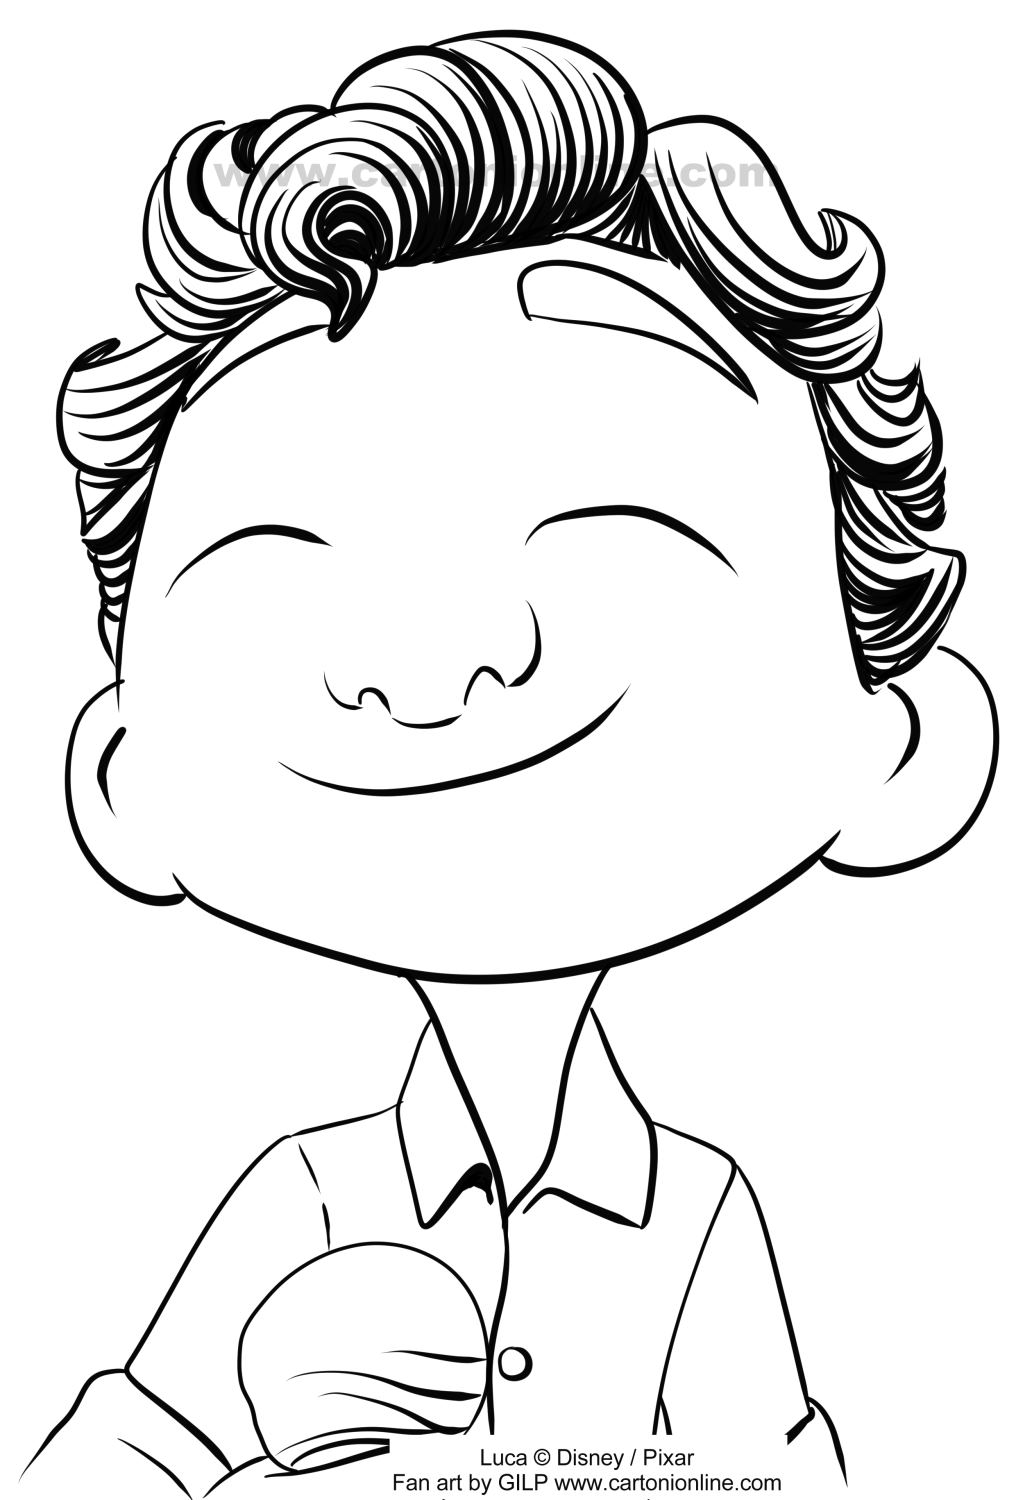 Luca Paguro from Luca (Disney/Pixar) coloring page to print and coloring